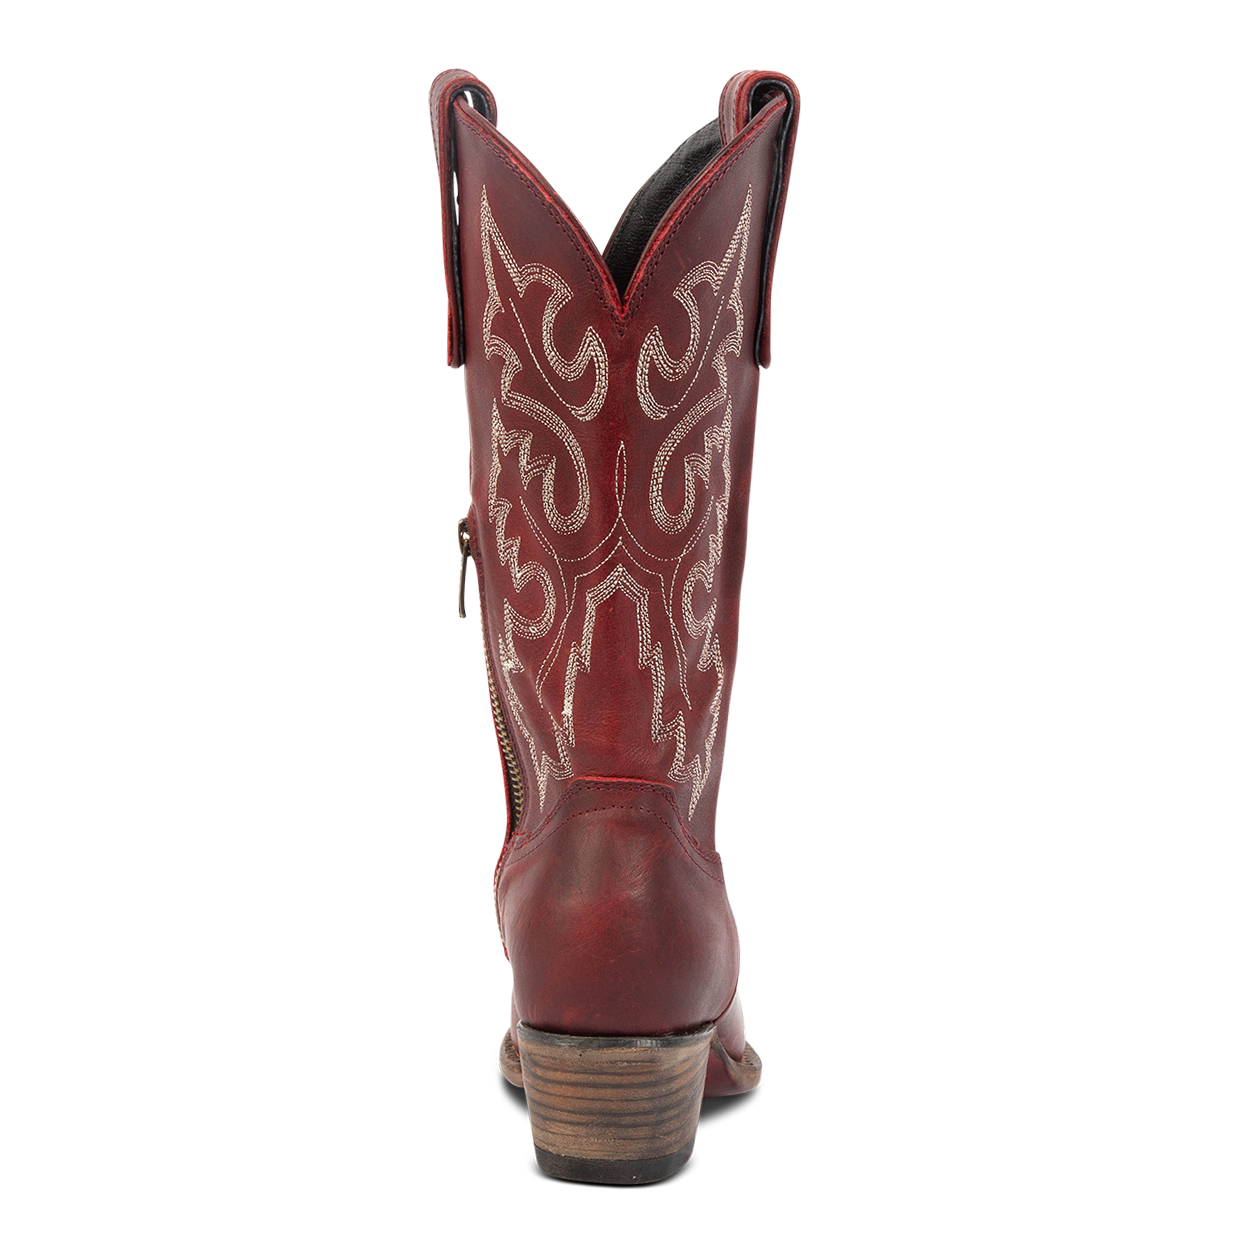 Back view showing intricate stitching and low heel on FREEBIRD women's Wilson wine leather western boot